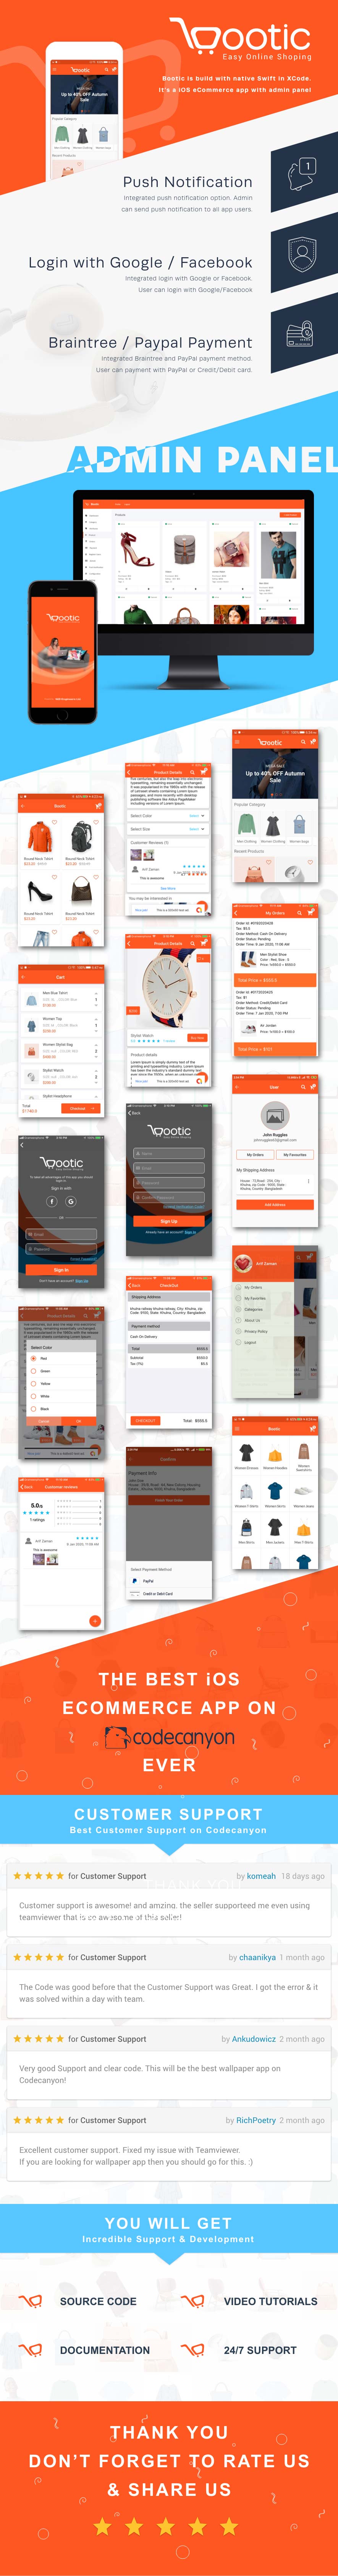 Bootic - An iOS eCommerce app with admin panel - 6